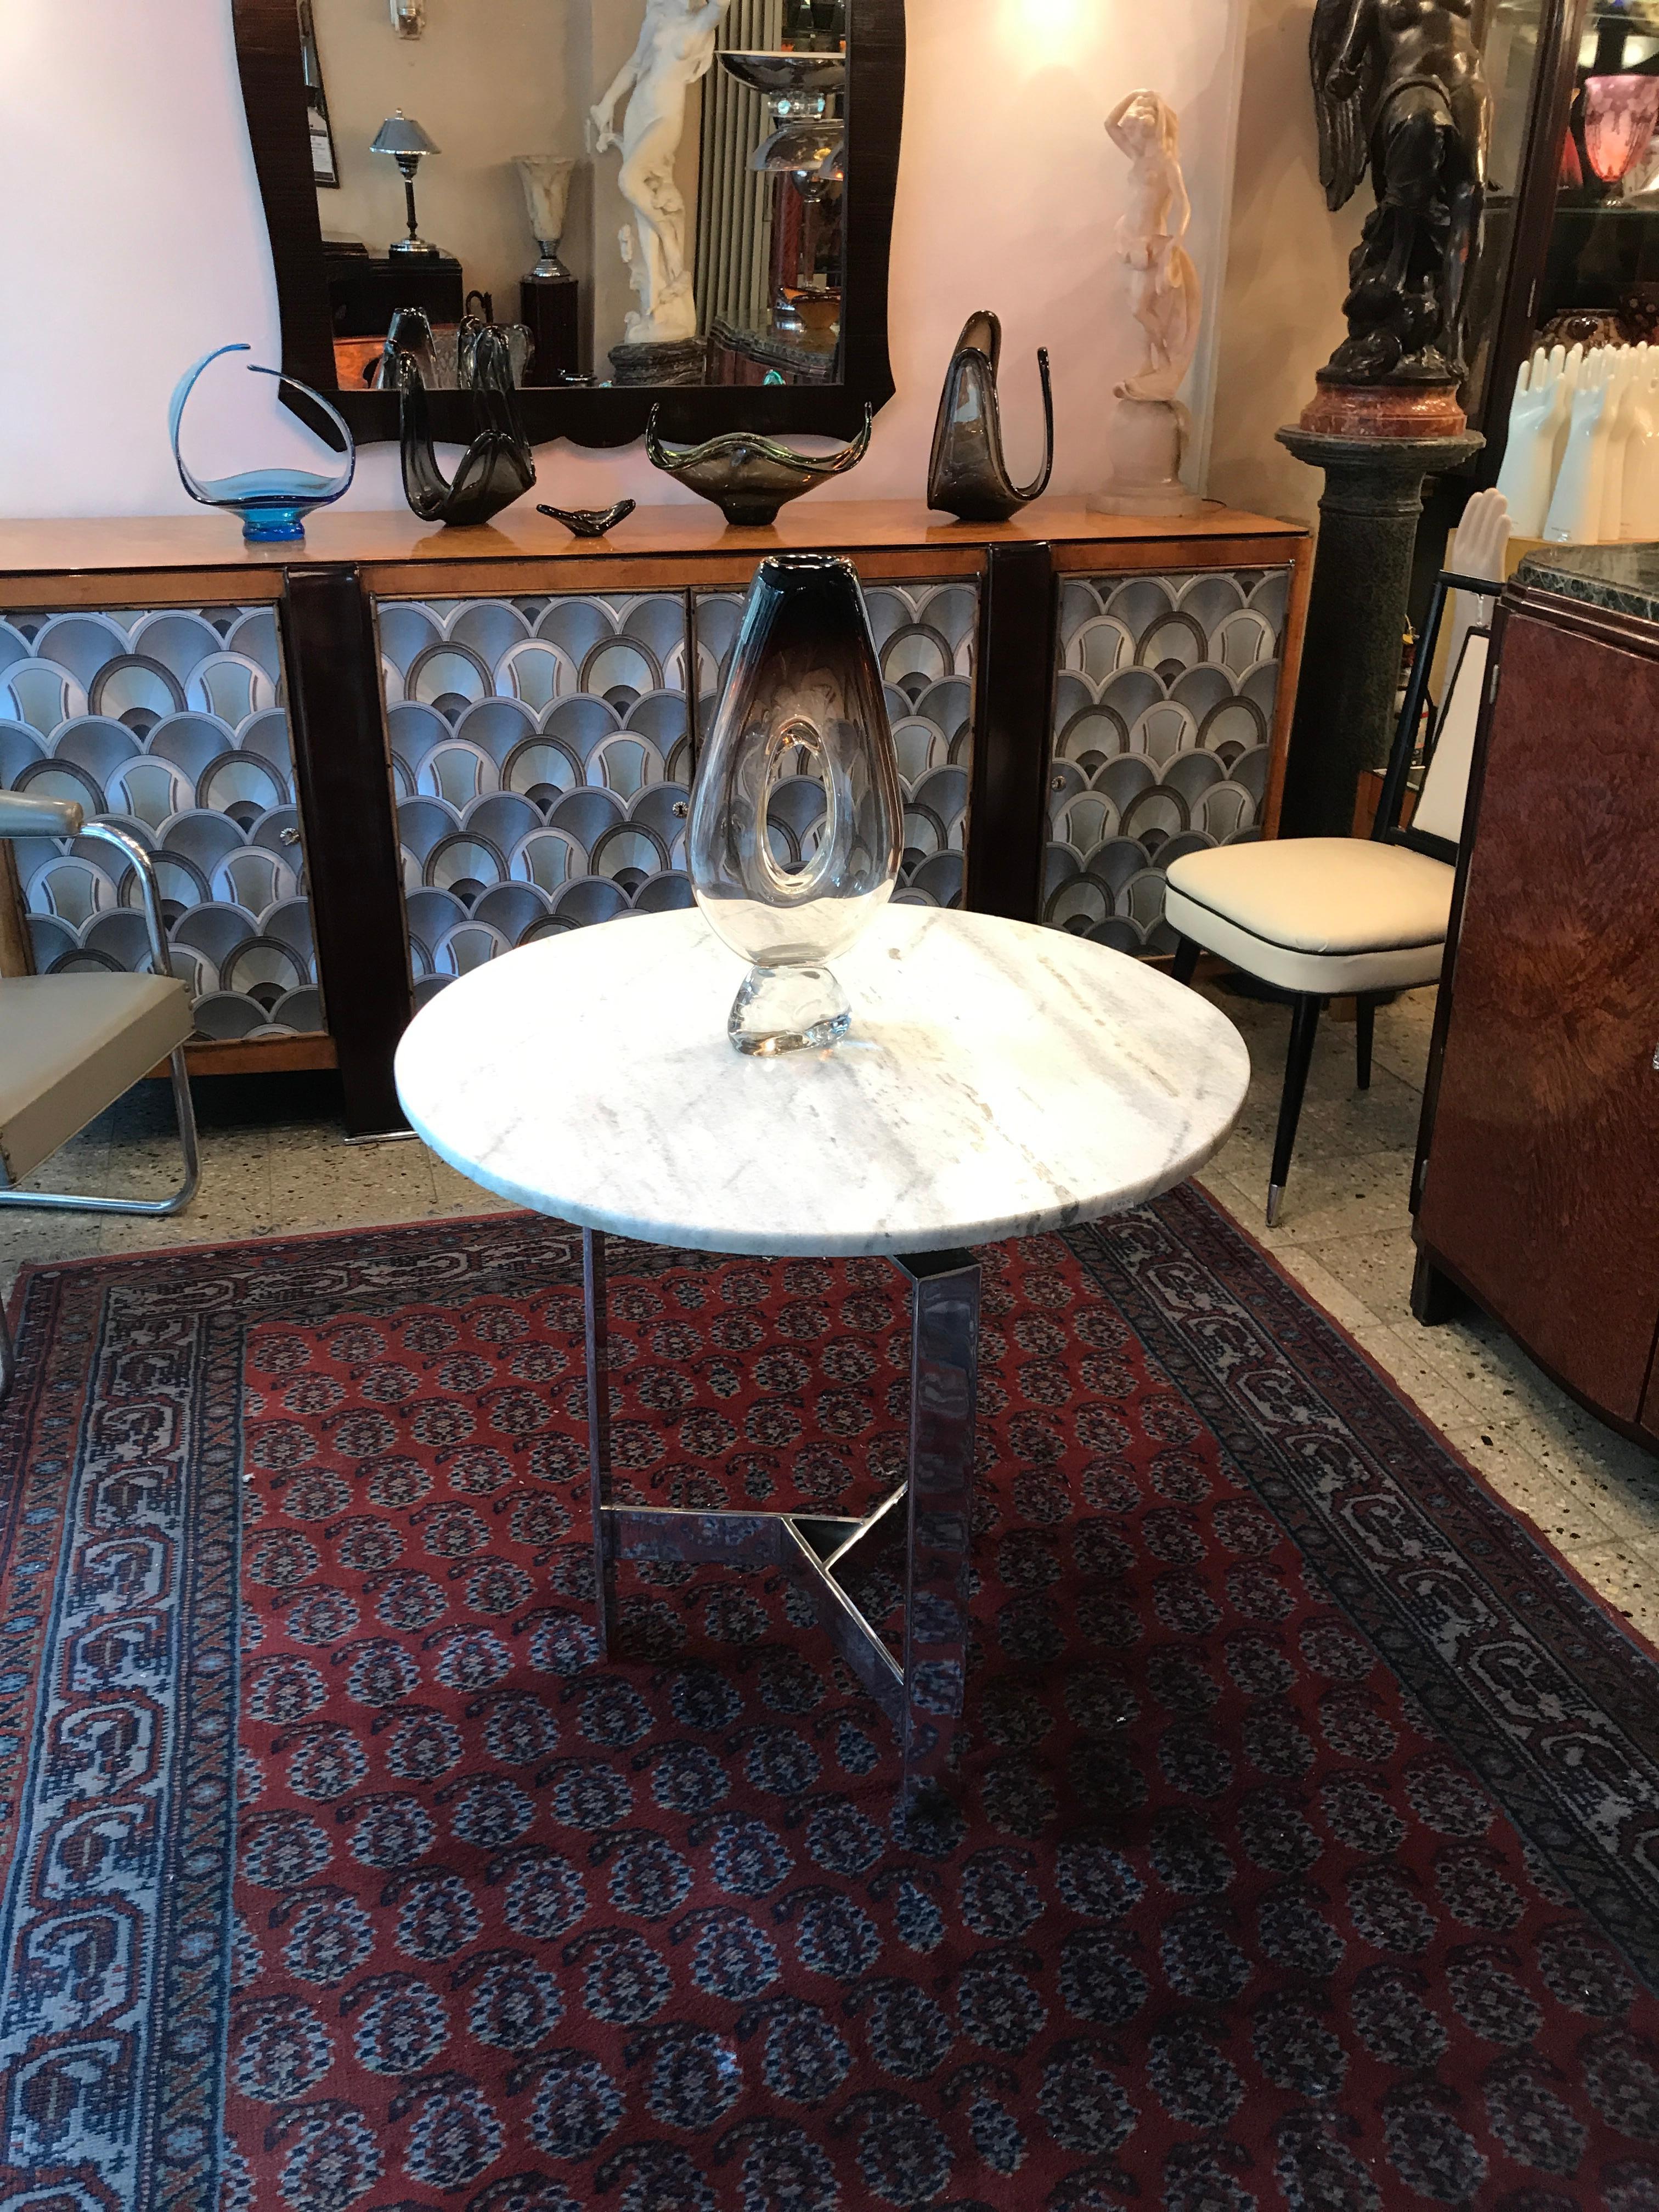 Sign: Crystal Querandi Yugendstil 0294/85

We have specialized in the sale of Art Deco and Art Nouveau and Vintage styles since 1982. If you have any questions we are at your disposal.
Pushing the button that reads 'View All From Seller'. And you